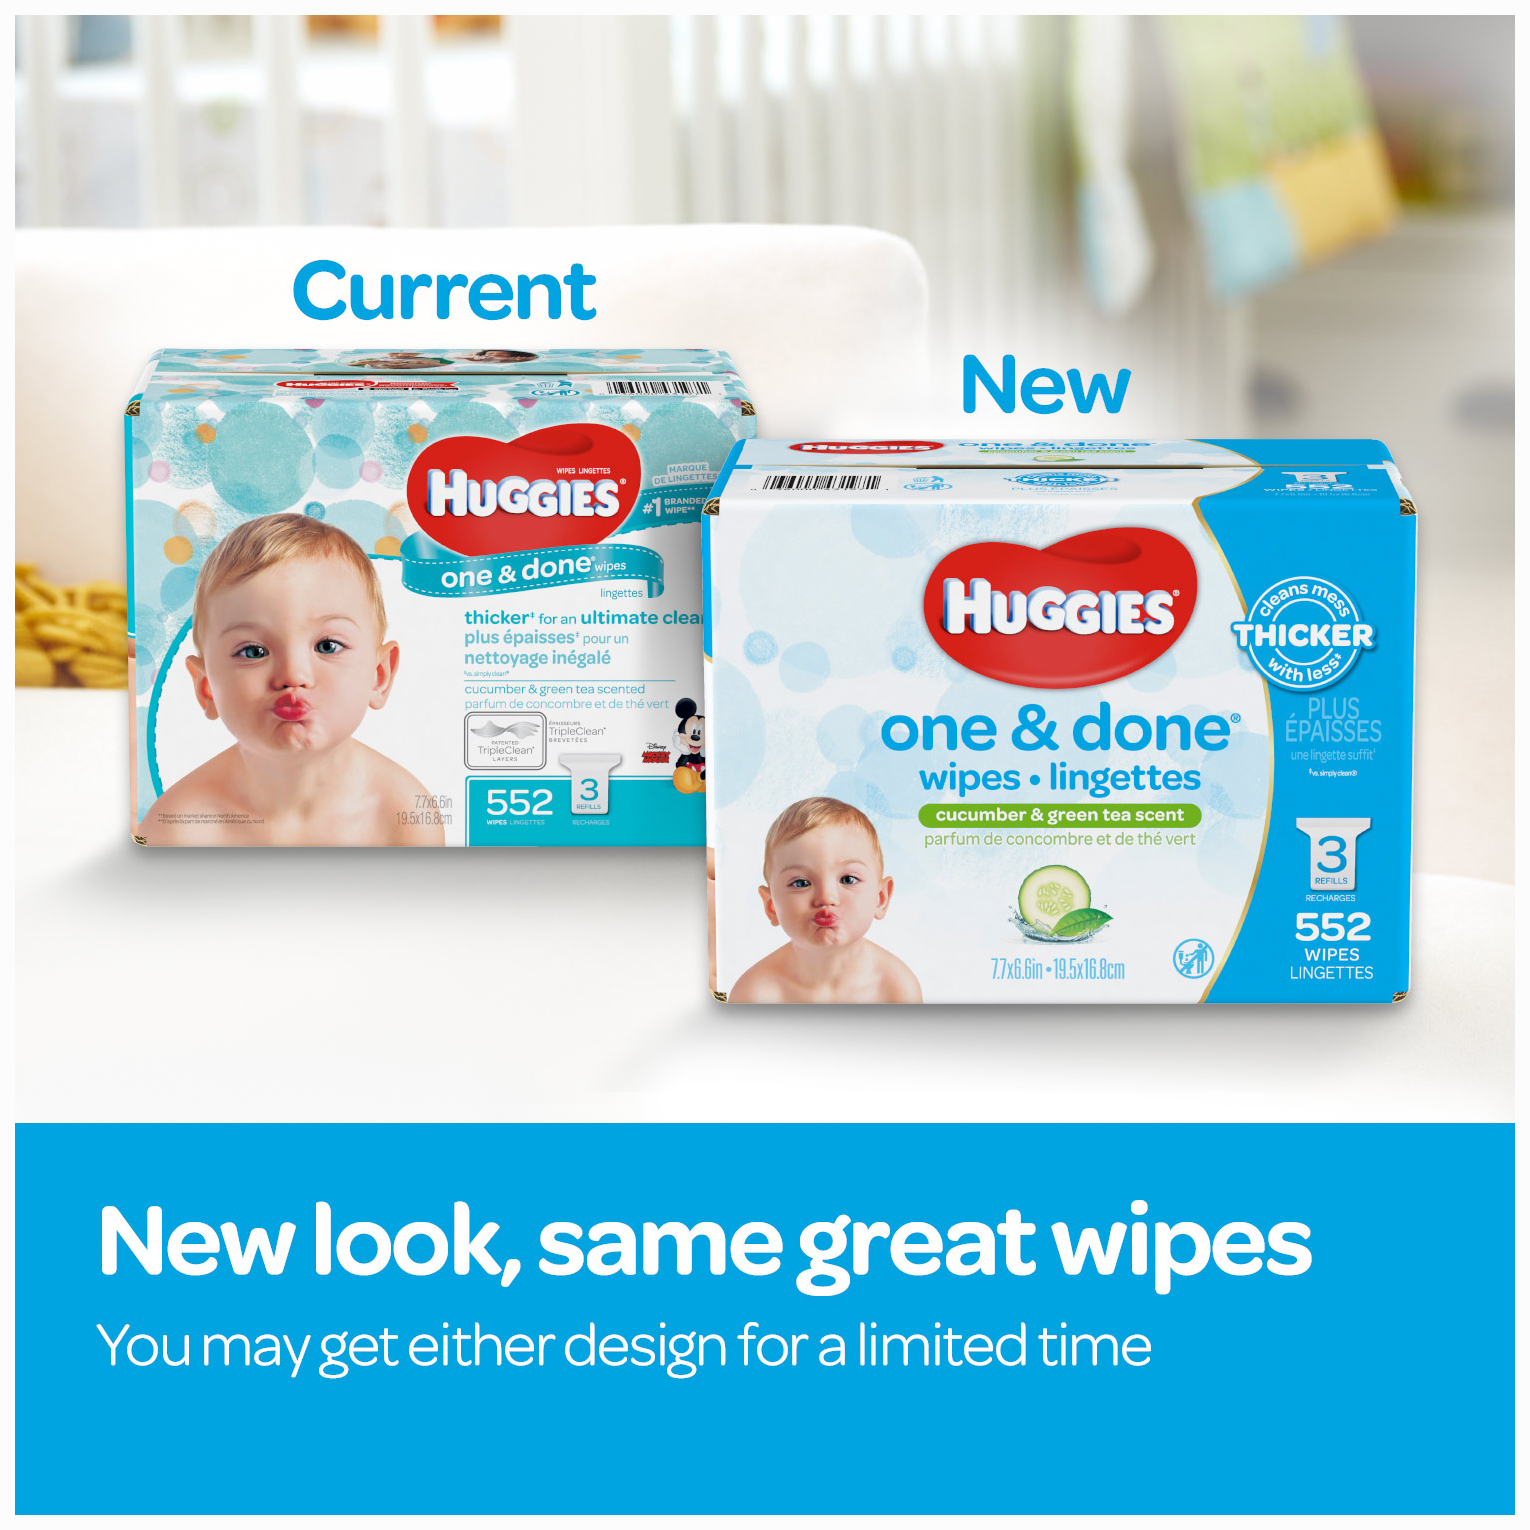 Huggies One & Done Cucumber & Green Tea Baby Wipes (64 Count) - image 2 of 10